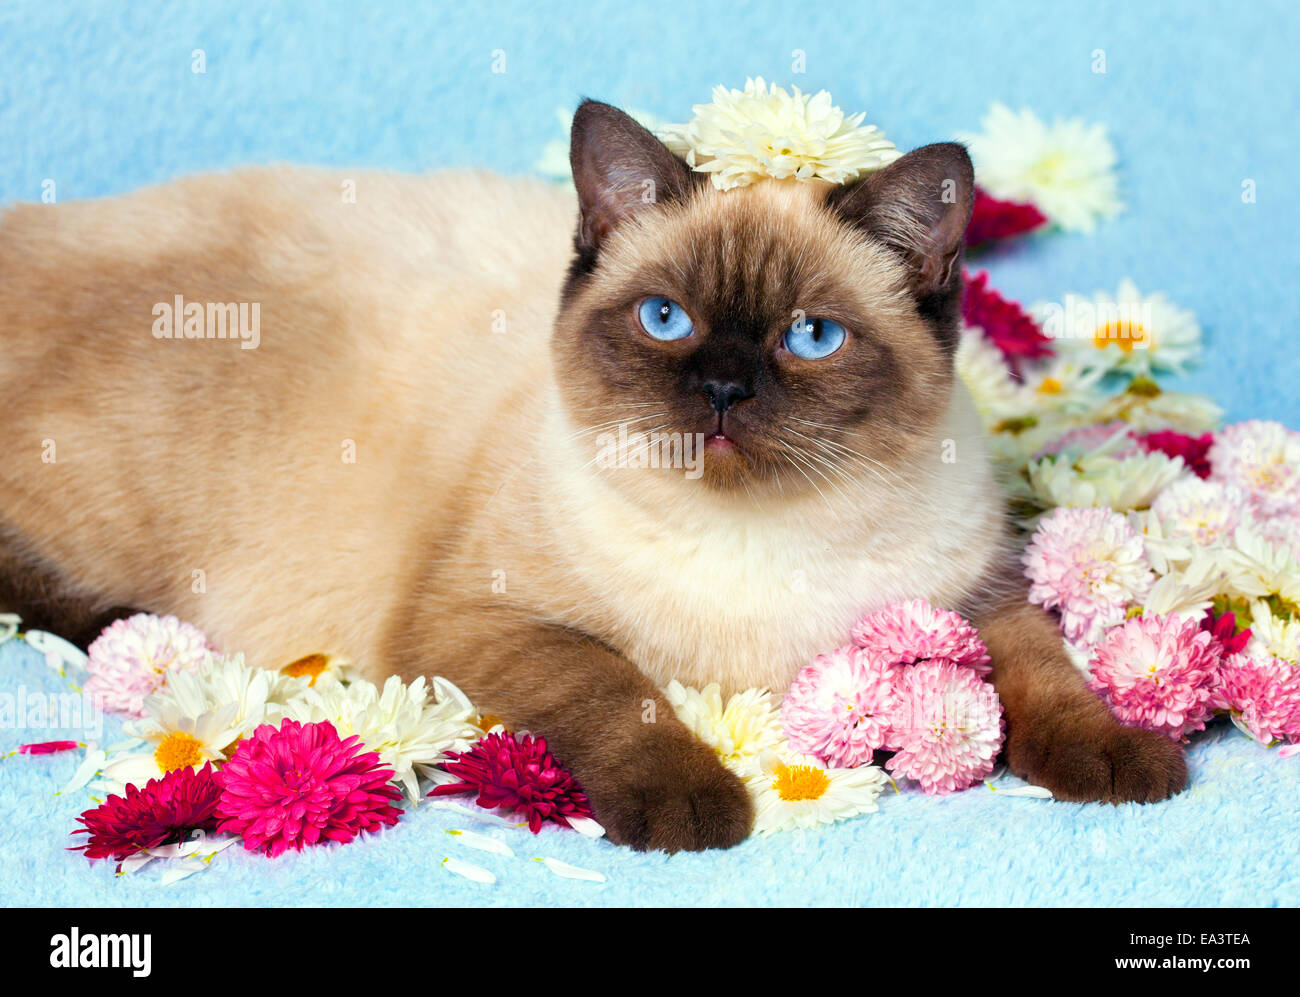 Cute Color Point British Shorthair Cat Relaxing On Blue Blanket Stock Photo Alamy